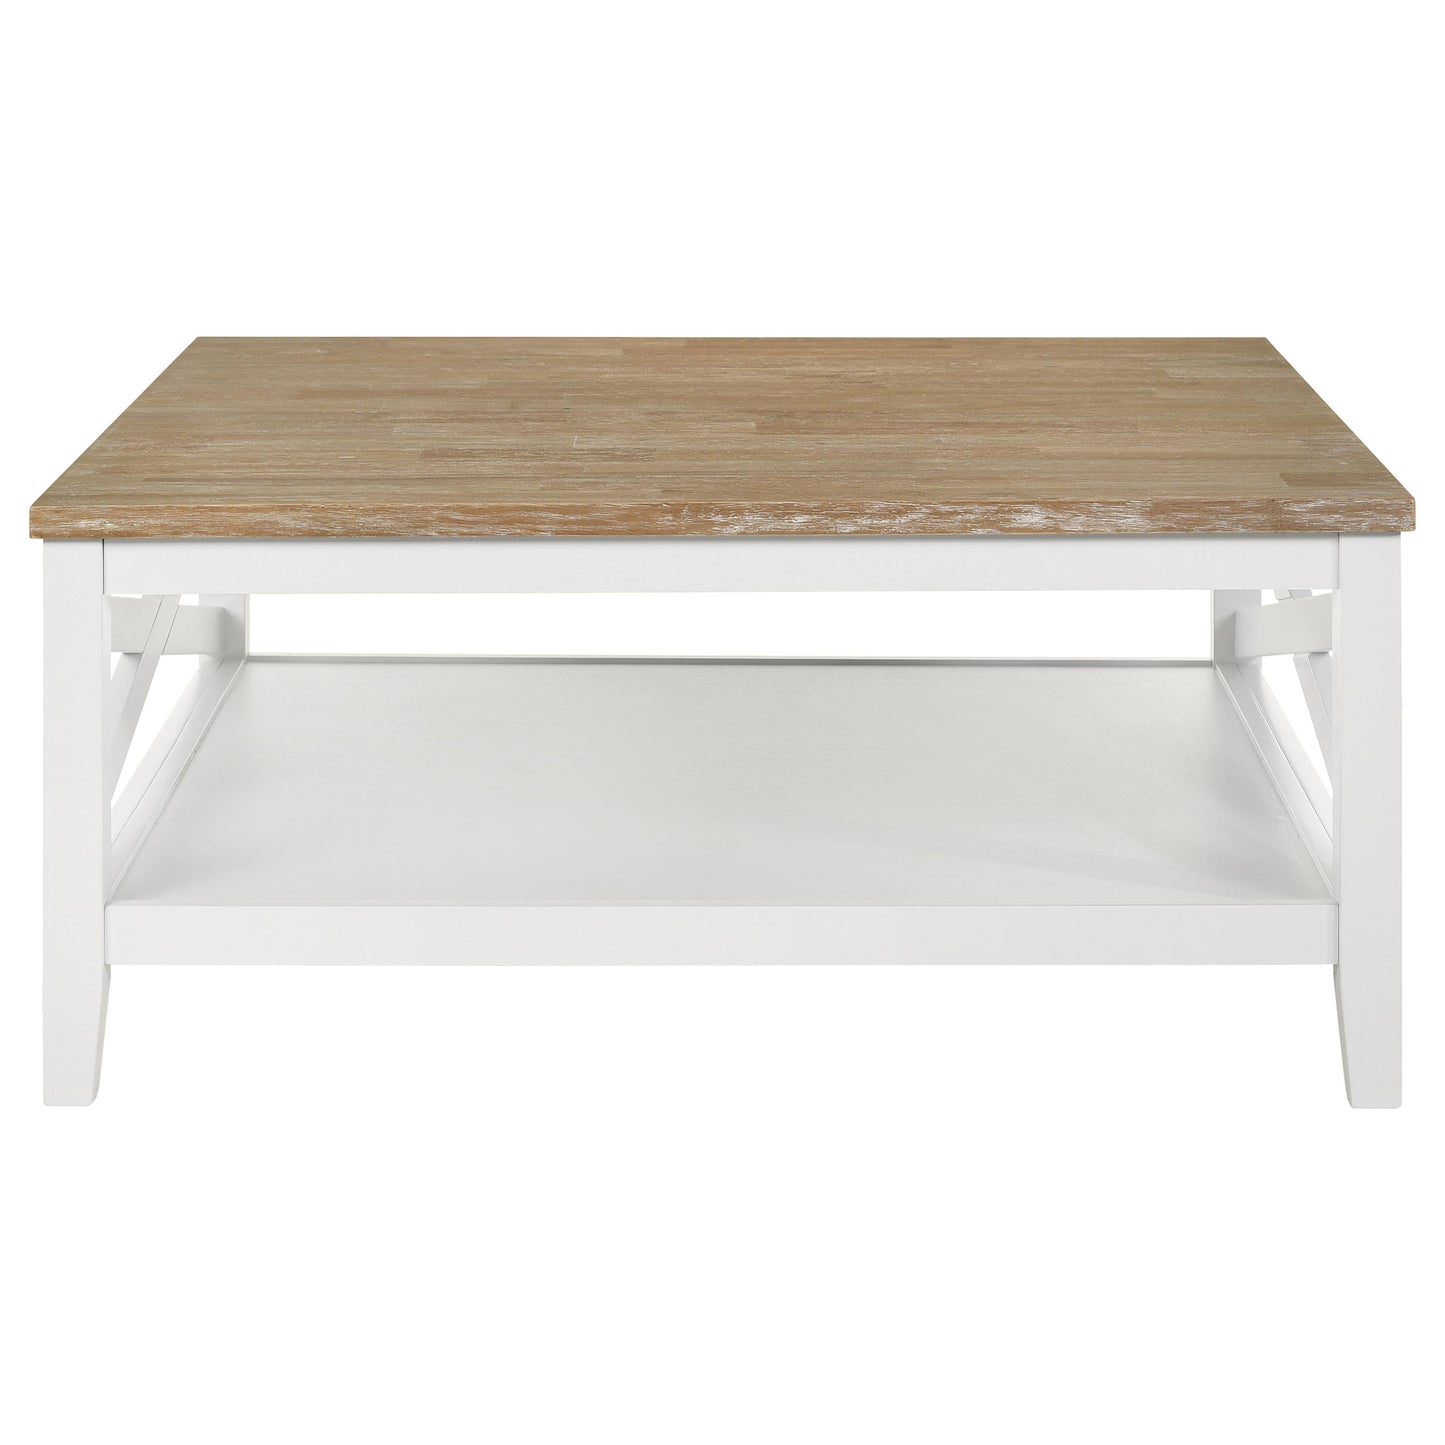 Maisy Square Wooden Coffee Table With Shelf Brown and White